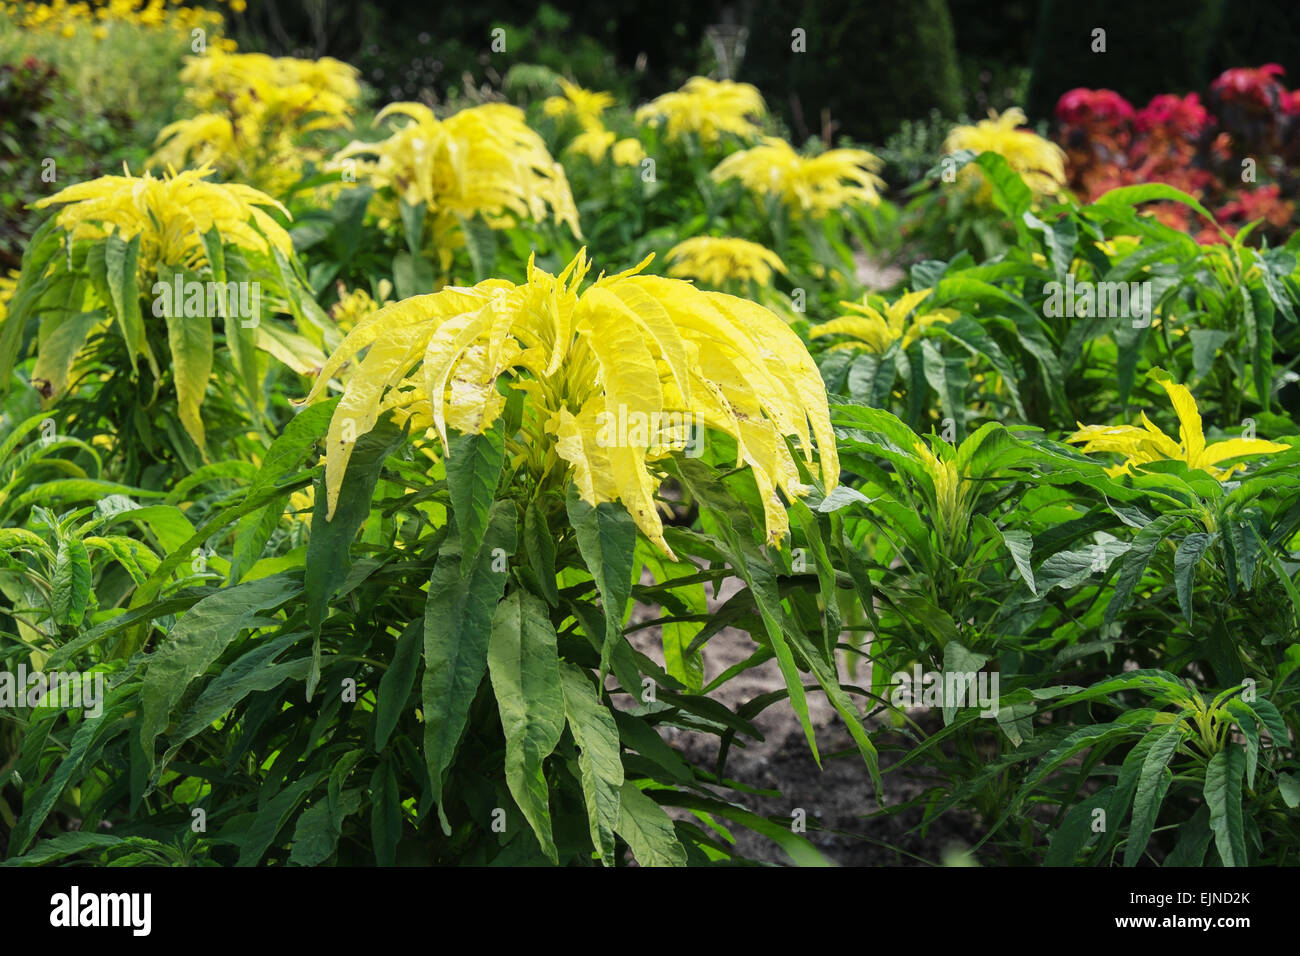 Amaranthus 'tricolor aurora' growing in vegetable and flower garden at Chateau de Chenonceau in the Indre-et-Loire, France Stock Photo